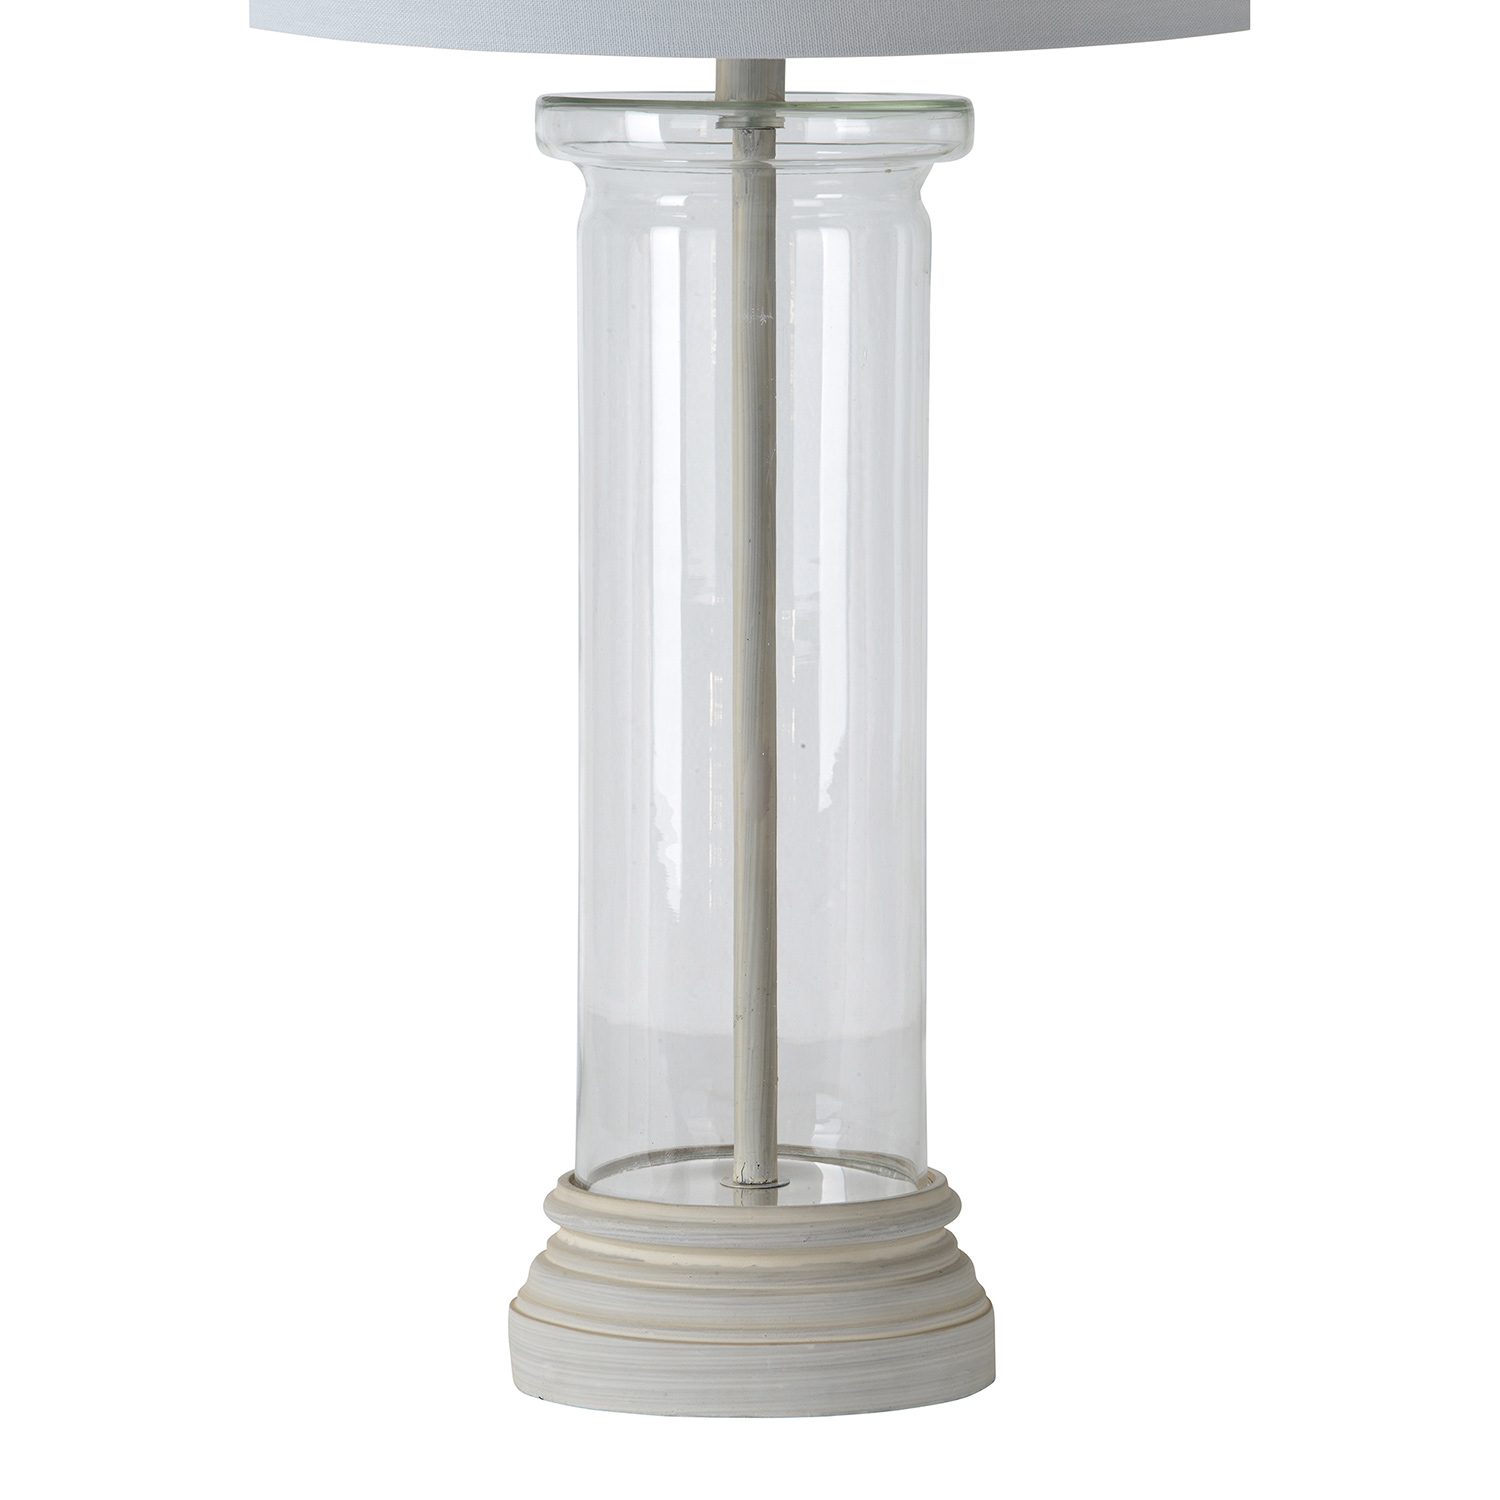 Ren-Wil West Table Lamp - White Wash